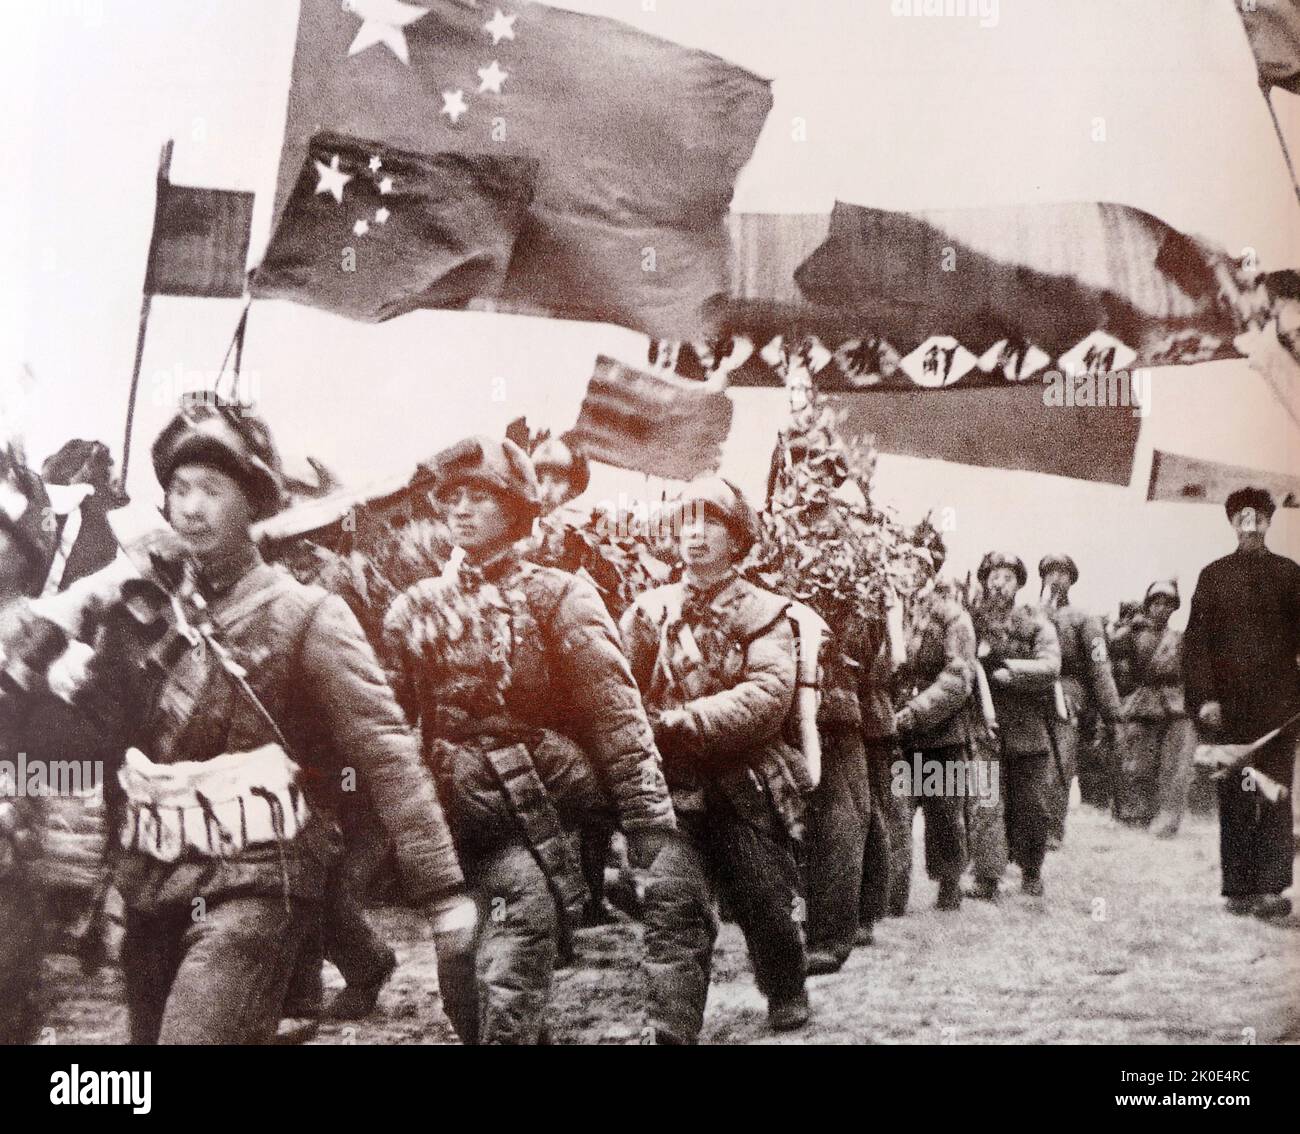 Chinese forces entering the Korean War, between North Korea and South Korea from 25 June 1950 to 27 July 1953. It began as an attempt by North Korean supreme leader Kim Il-sung to unify Korea under his communist regime through military force. Two powers entered the war, with the United States under President Truman fighting alongside the South and the newly established People's Republic of China fighting alongside the North. Stock Photo